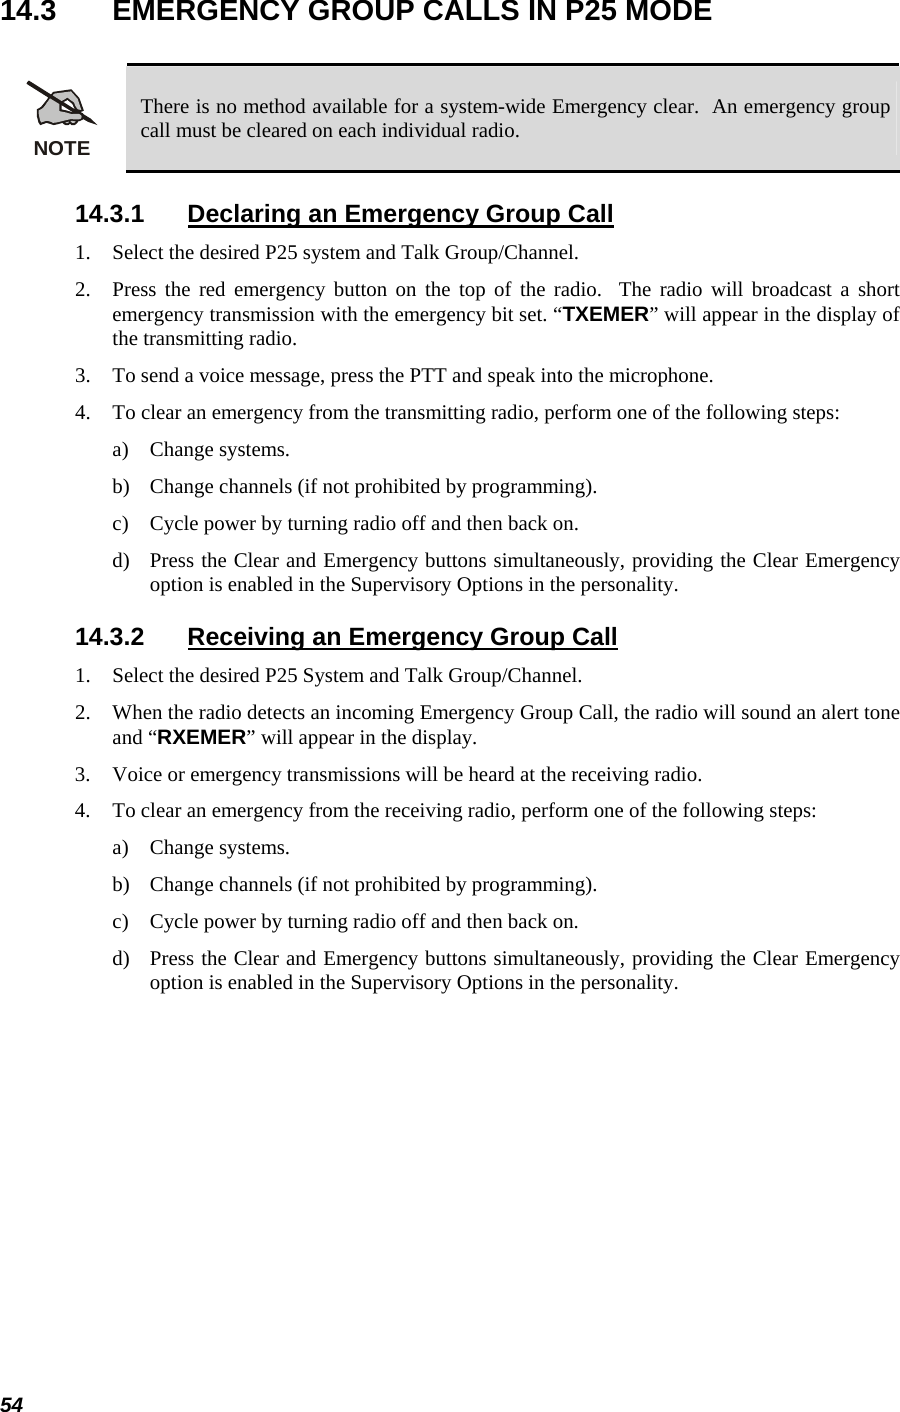  54 14.3  EMERGENCY GROUP CALLS IN P25 MODE  NOTE There is no method available for a system-wide Emergency clear.  An emergency group call must be cleared on each individual radio. 14.3.1  Declaring an Emergency Group Call 1. Select the desired P25 system and Talk Group/Channel. 2. Press the red emergency button on the top of the radio.  The radio will broadcast a short emergency transmission with the emergency bit set. “TXEMER” will appear in the display of the transmitting radio. 3. To send a voice message, press the PTT and speak into the microphone. 4. To clear an emergency from the transmitting radio, perform one of the following steps: a) Change systems. b) Change channels (if not prohibited by programming). c) Cycle power by turning radio off and then back on. d) Press the Clear and Emergency buttons simultaneously, providing the Clear Emergency option is enabled in the Supervisory Options in the personality. 14.3.2  Receiving an Emergency Group Call 1. Select the desired P25 System and Talk Group/Channel. 2. When the radio detects an incoming Emergency Group Call, the radio will sound an alert tone and “RXEMER” will appear in the display. 3. Voice or emergency transmissions will be heard at the receiving radio. 4. To clear an emergency from the receiving radio, perform one of the following steps: a) Change systems. b) Change channels (if not prohibited by programming). c) Cycle power by turning radio off and then back on.  d) Press the Clear and Emergency buttons simultaneously, providing the Clear Emergency option is enabled in the Supervisory Options in the personality. 